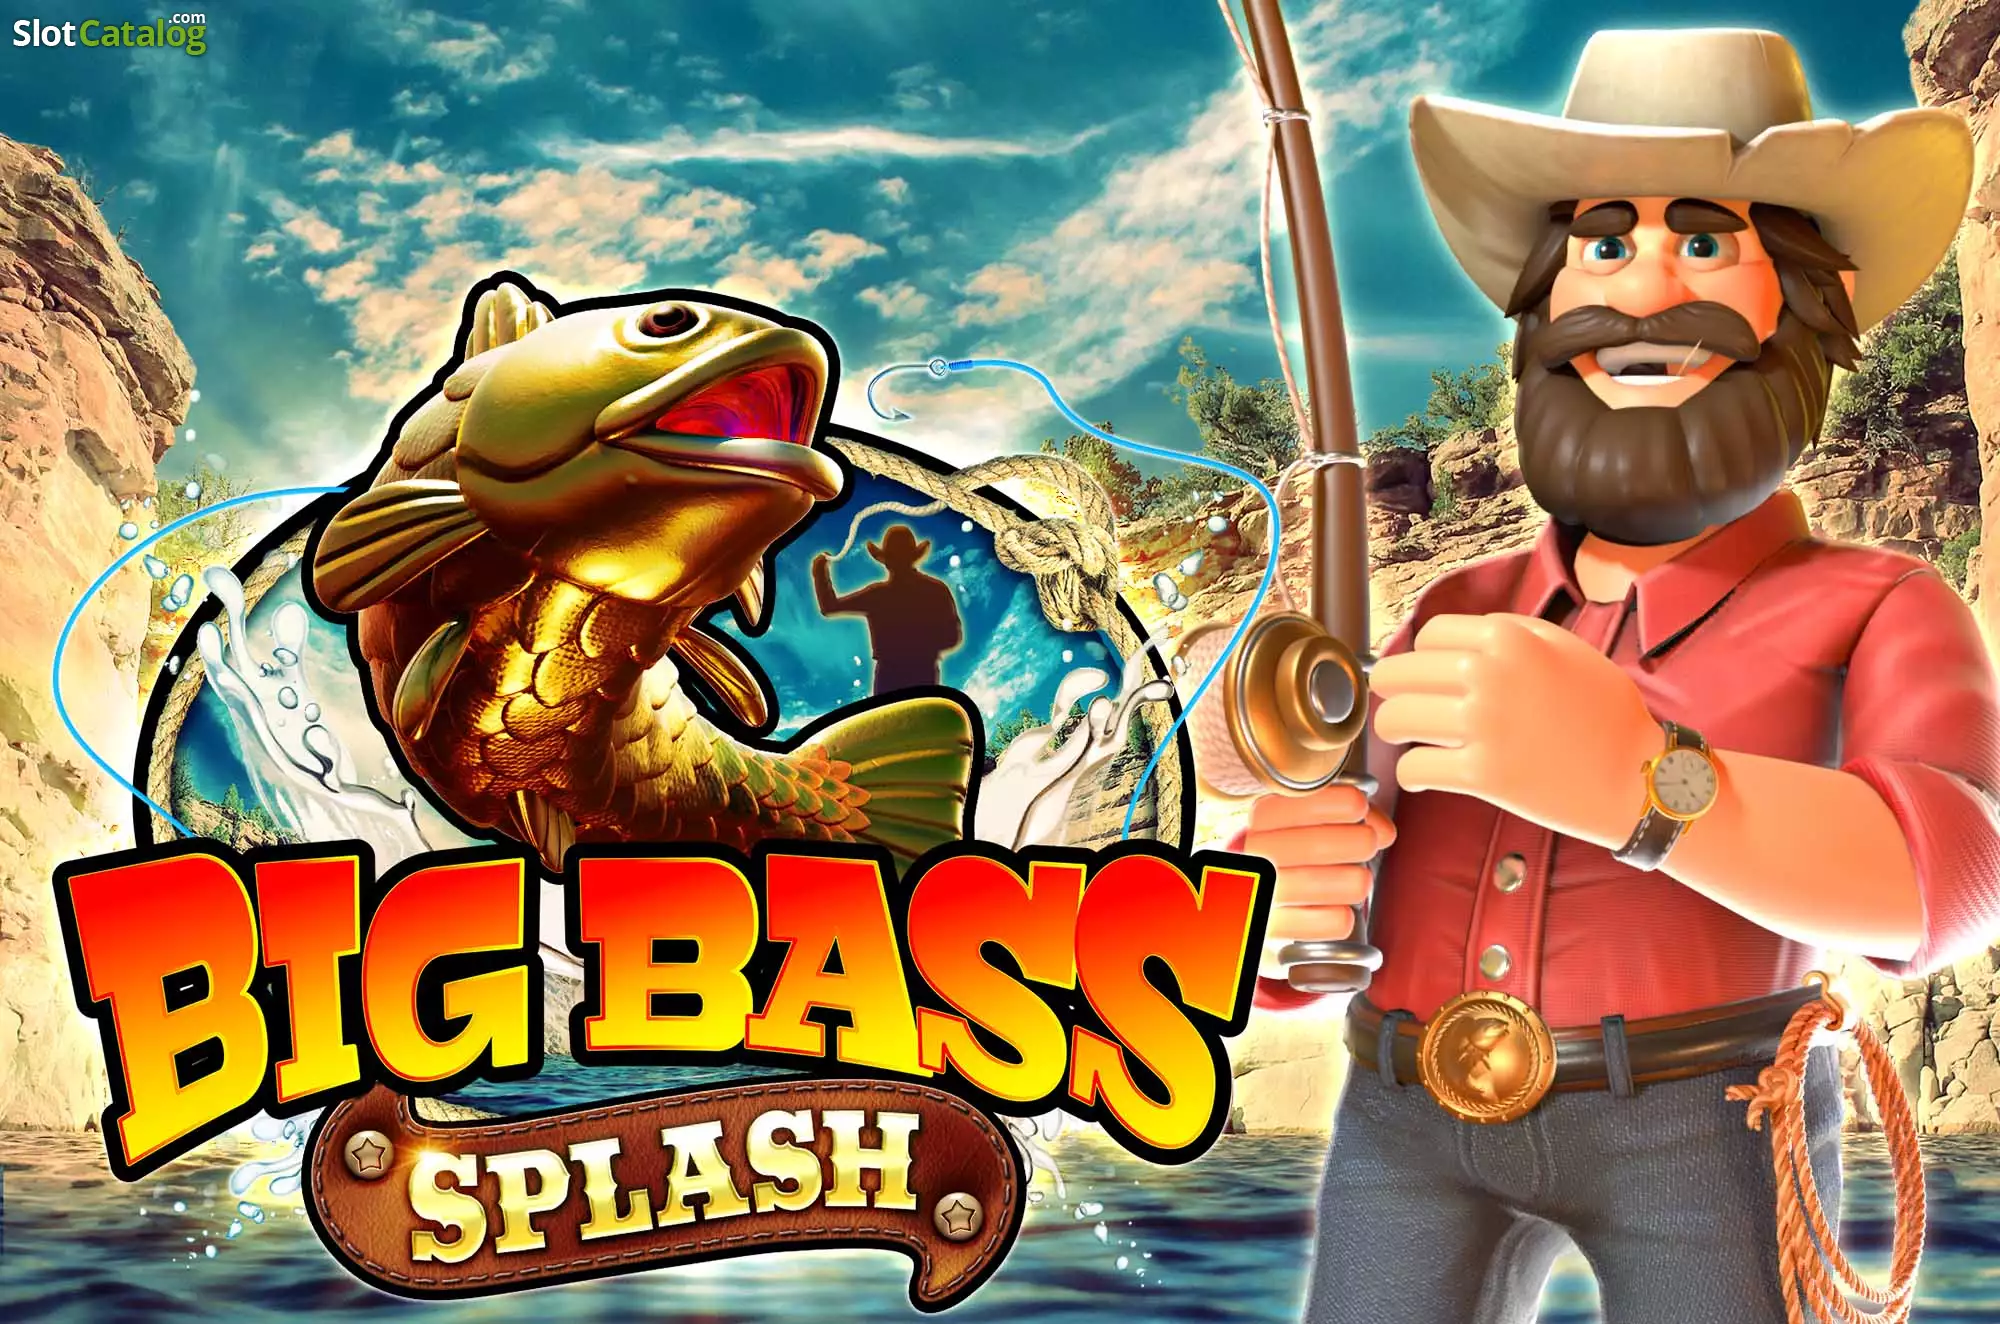 Huge Bass Splash Slot Video game Trial Gamble and Free Spins